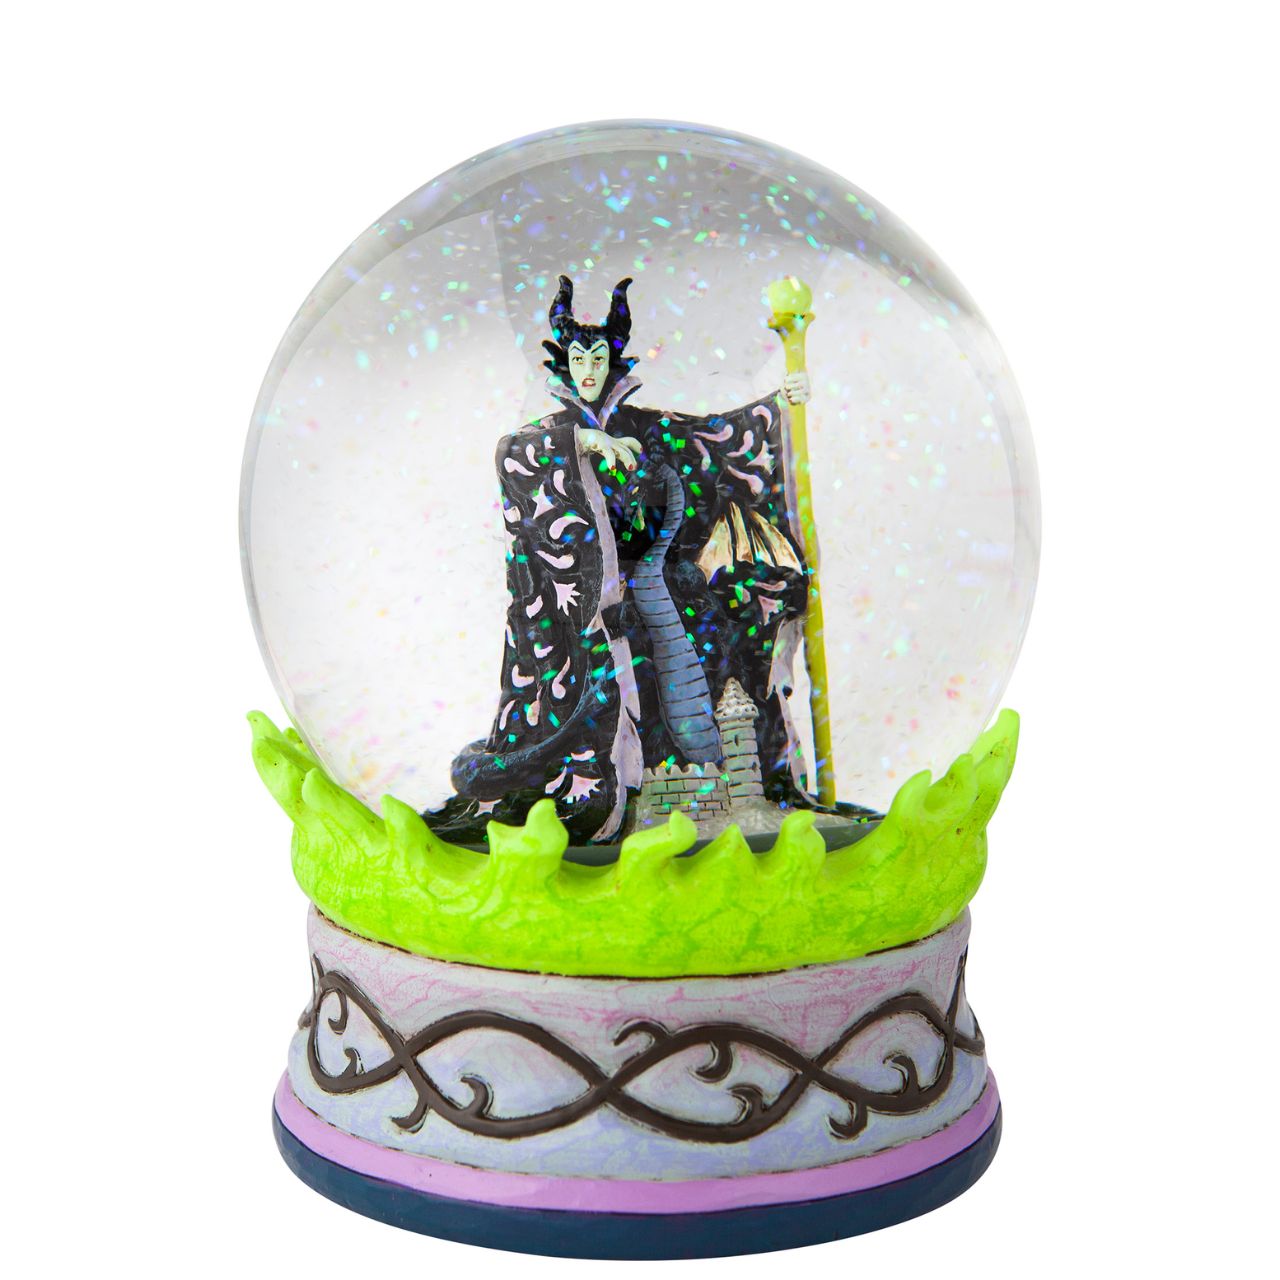 Disney's Sleeping Beauty Maleficent  Christmas Snow Globe  This waterball is almost caldron-like with it's eerie green flames and evil centerpiece. Maleficent, the bitter witch of Disney's Sleeping Beauty, strikes a dubious pose in the water. With immaculate craftsmanship this Jim Shore piece astonishes.